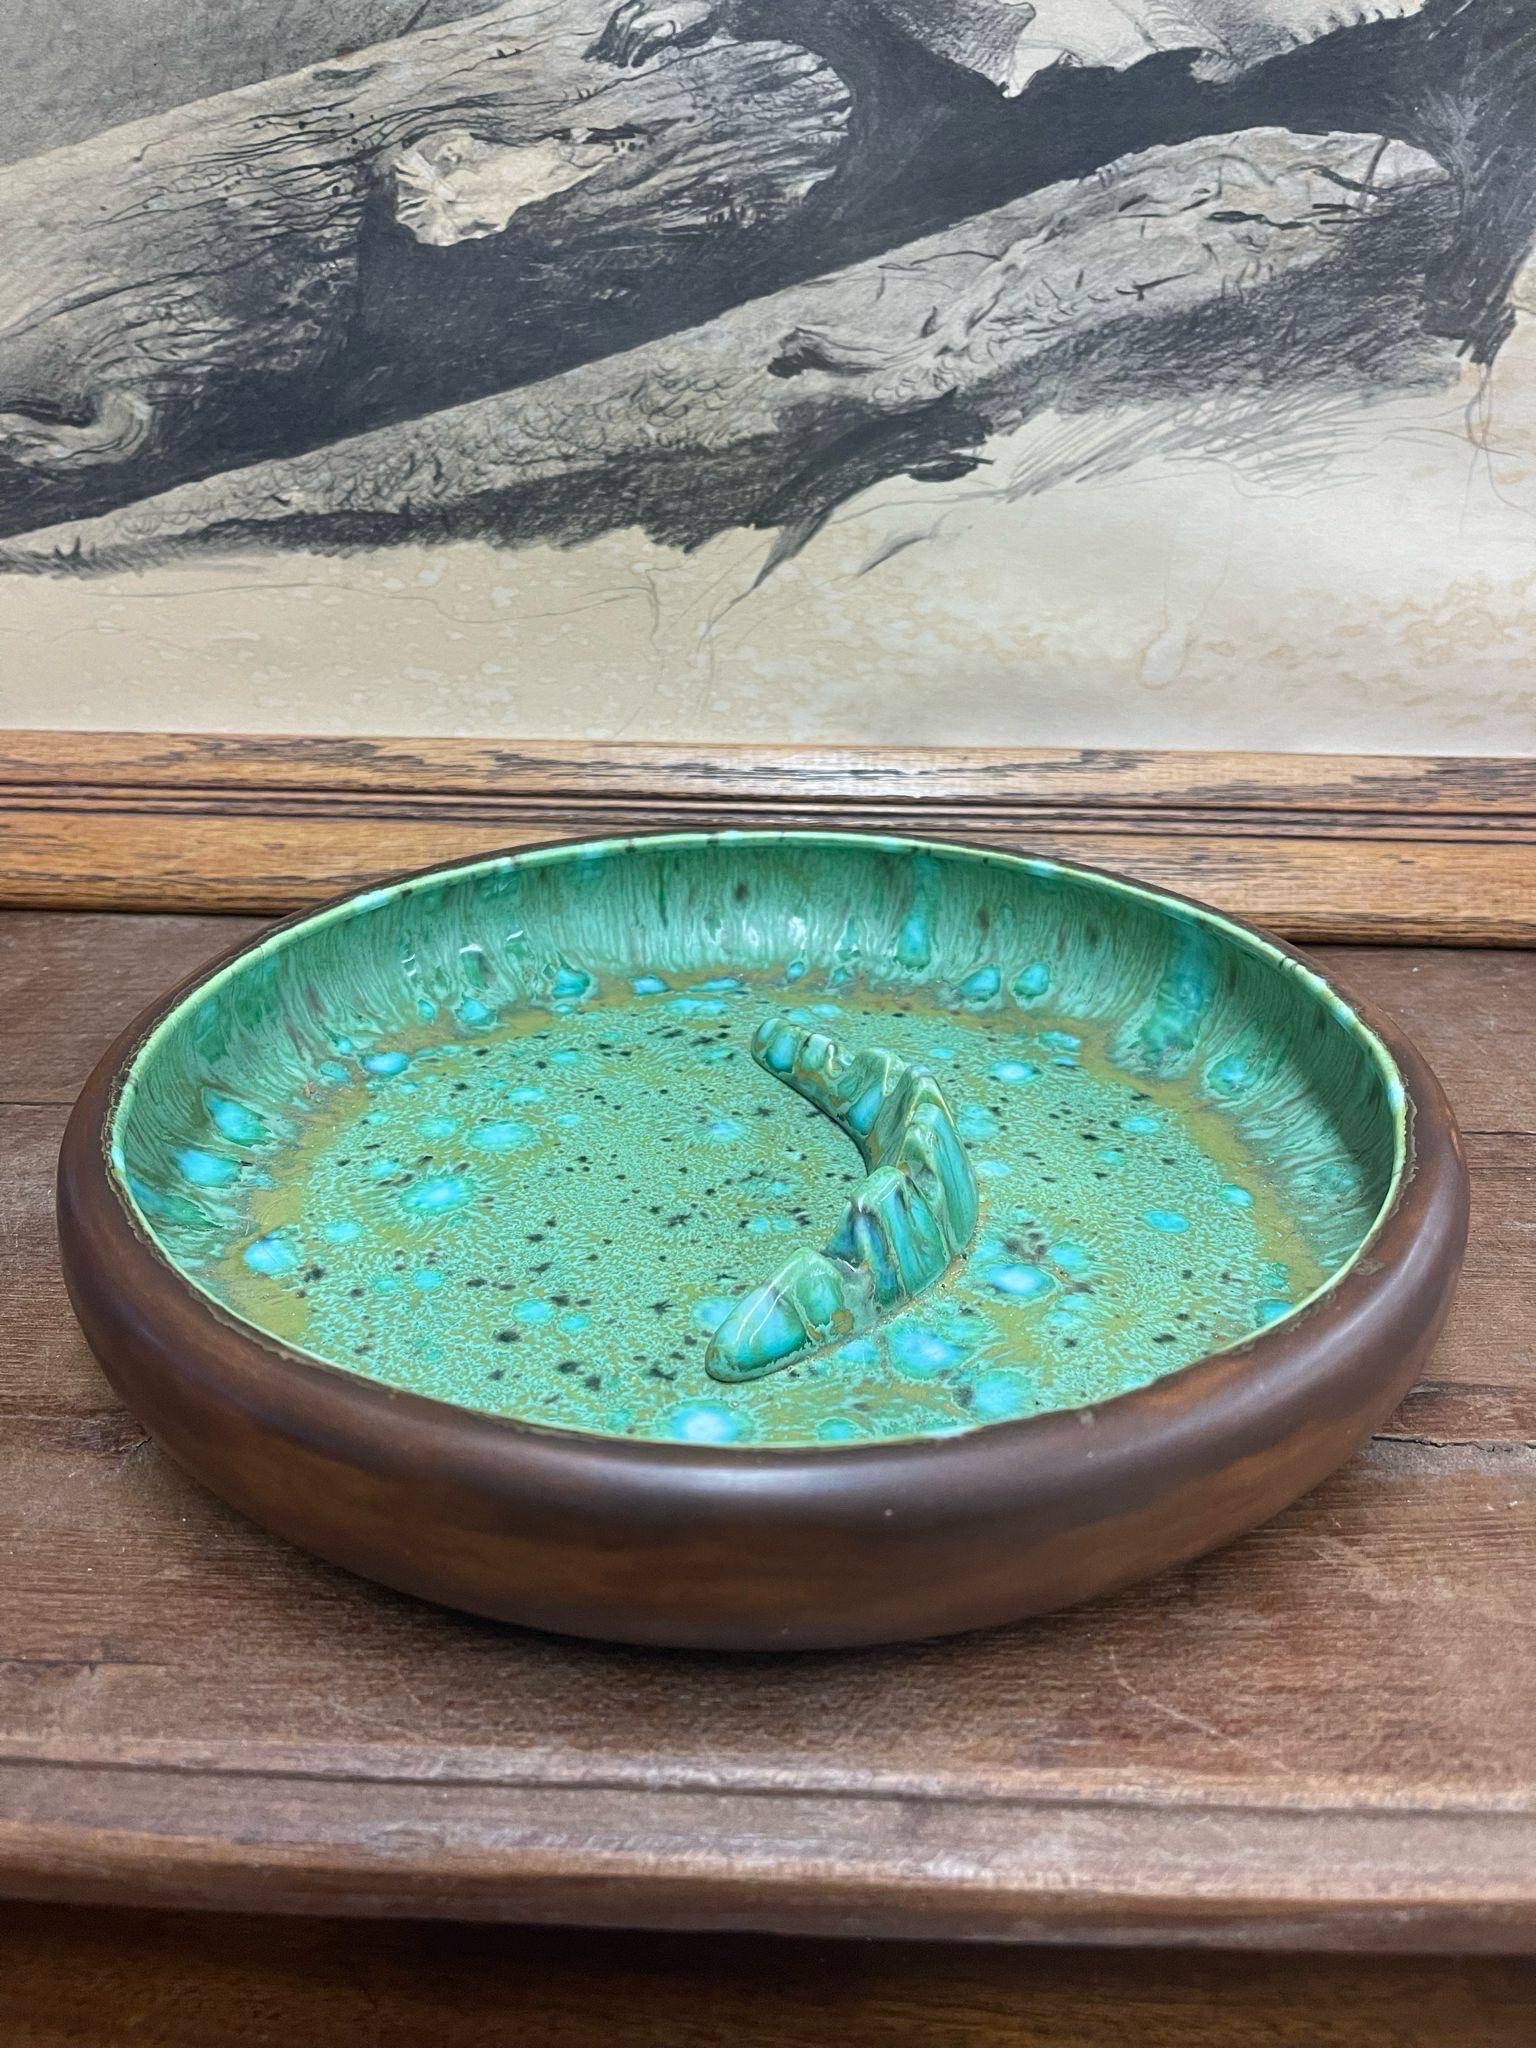 Ceramic Vintage Ash Tray with blue and green toned speckled interior Glaze. Brown color exterior. Circa 1970S. Vintage Condition Consistent with Age as Pictured

Dimensions. 11 Diameter; 2 H